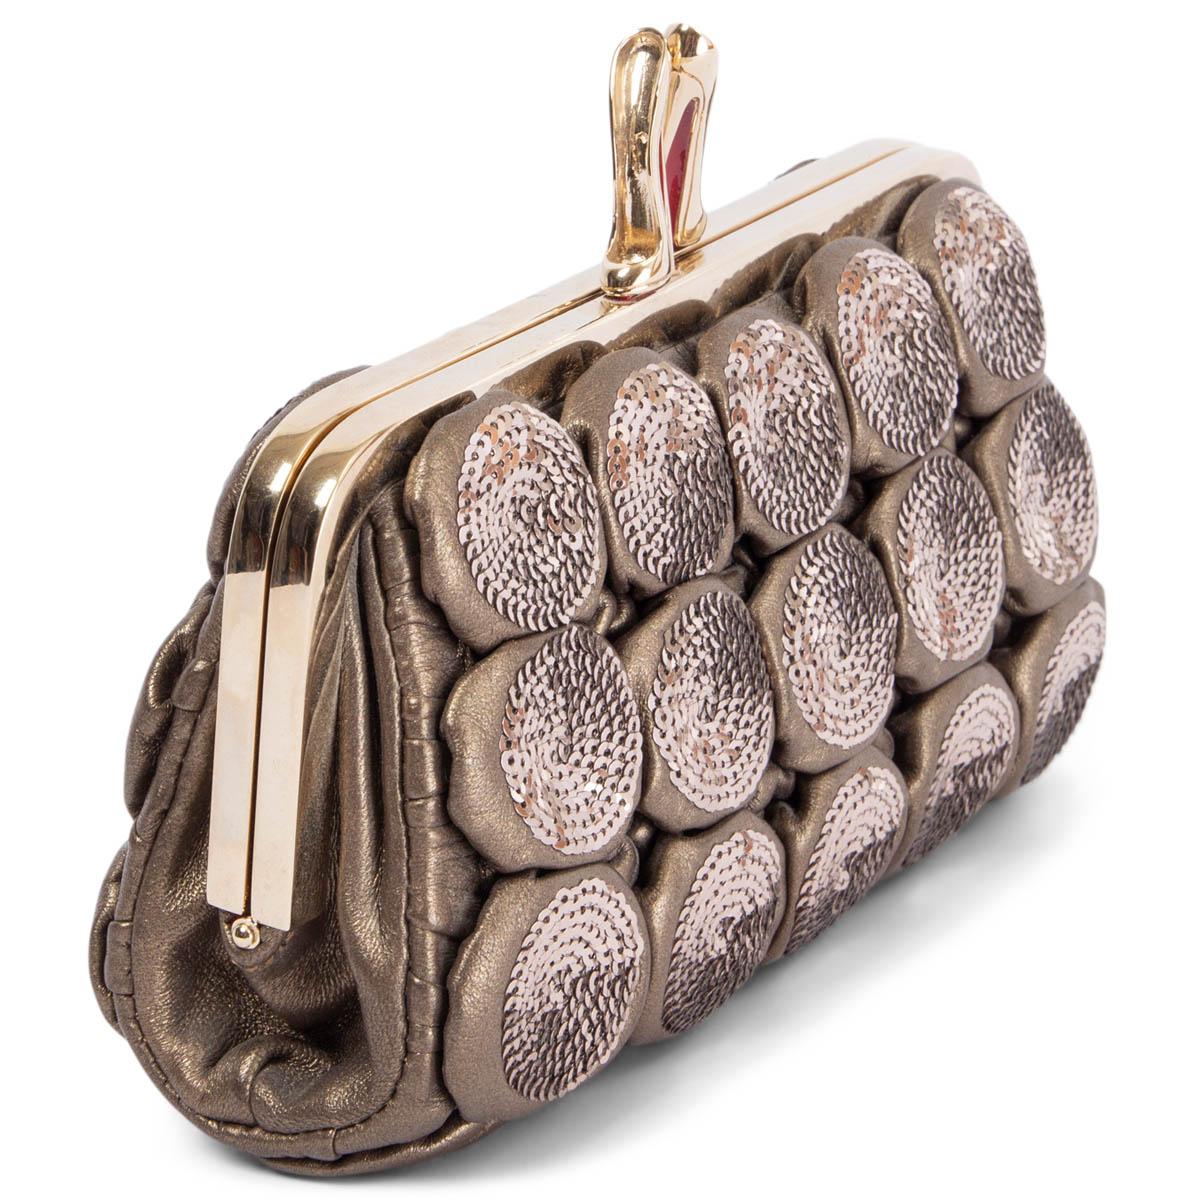 100% authentic Christian Louboutin clutch in metallic warm grey lambskin and sequins. Opens with a light gold-tone metal frame and signature high-heel clasp. Lined in red grosgrain fabric with one open pocket against the back. Has been carried and